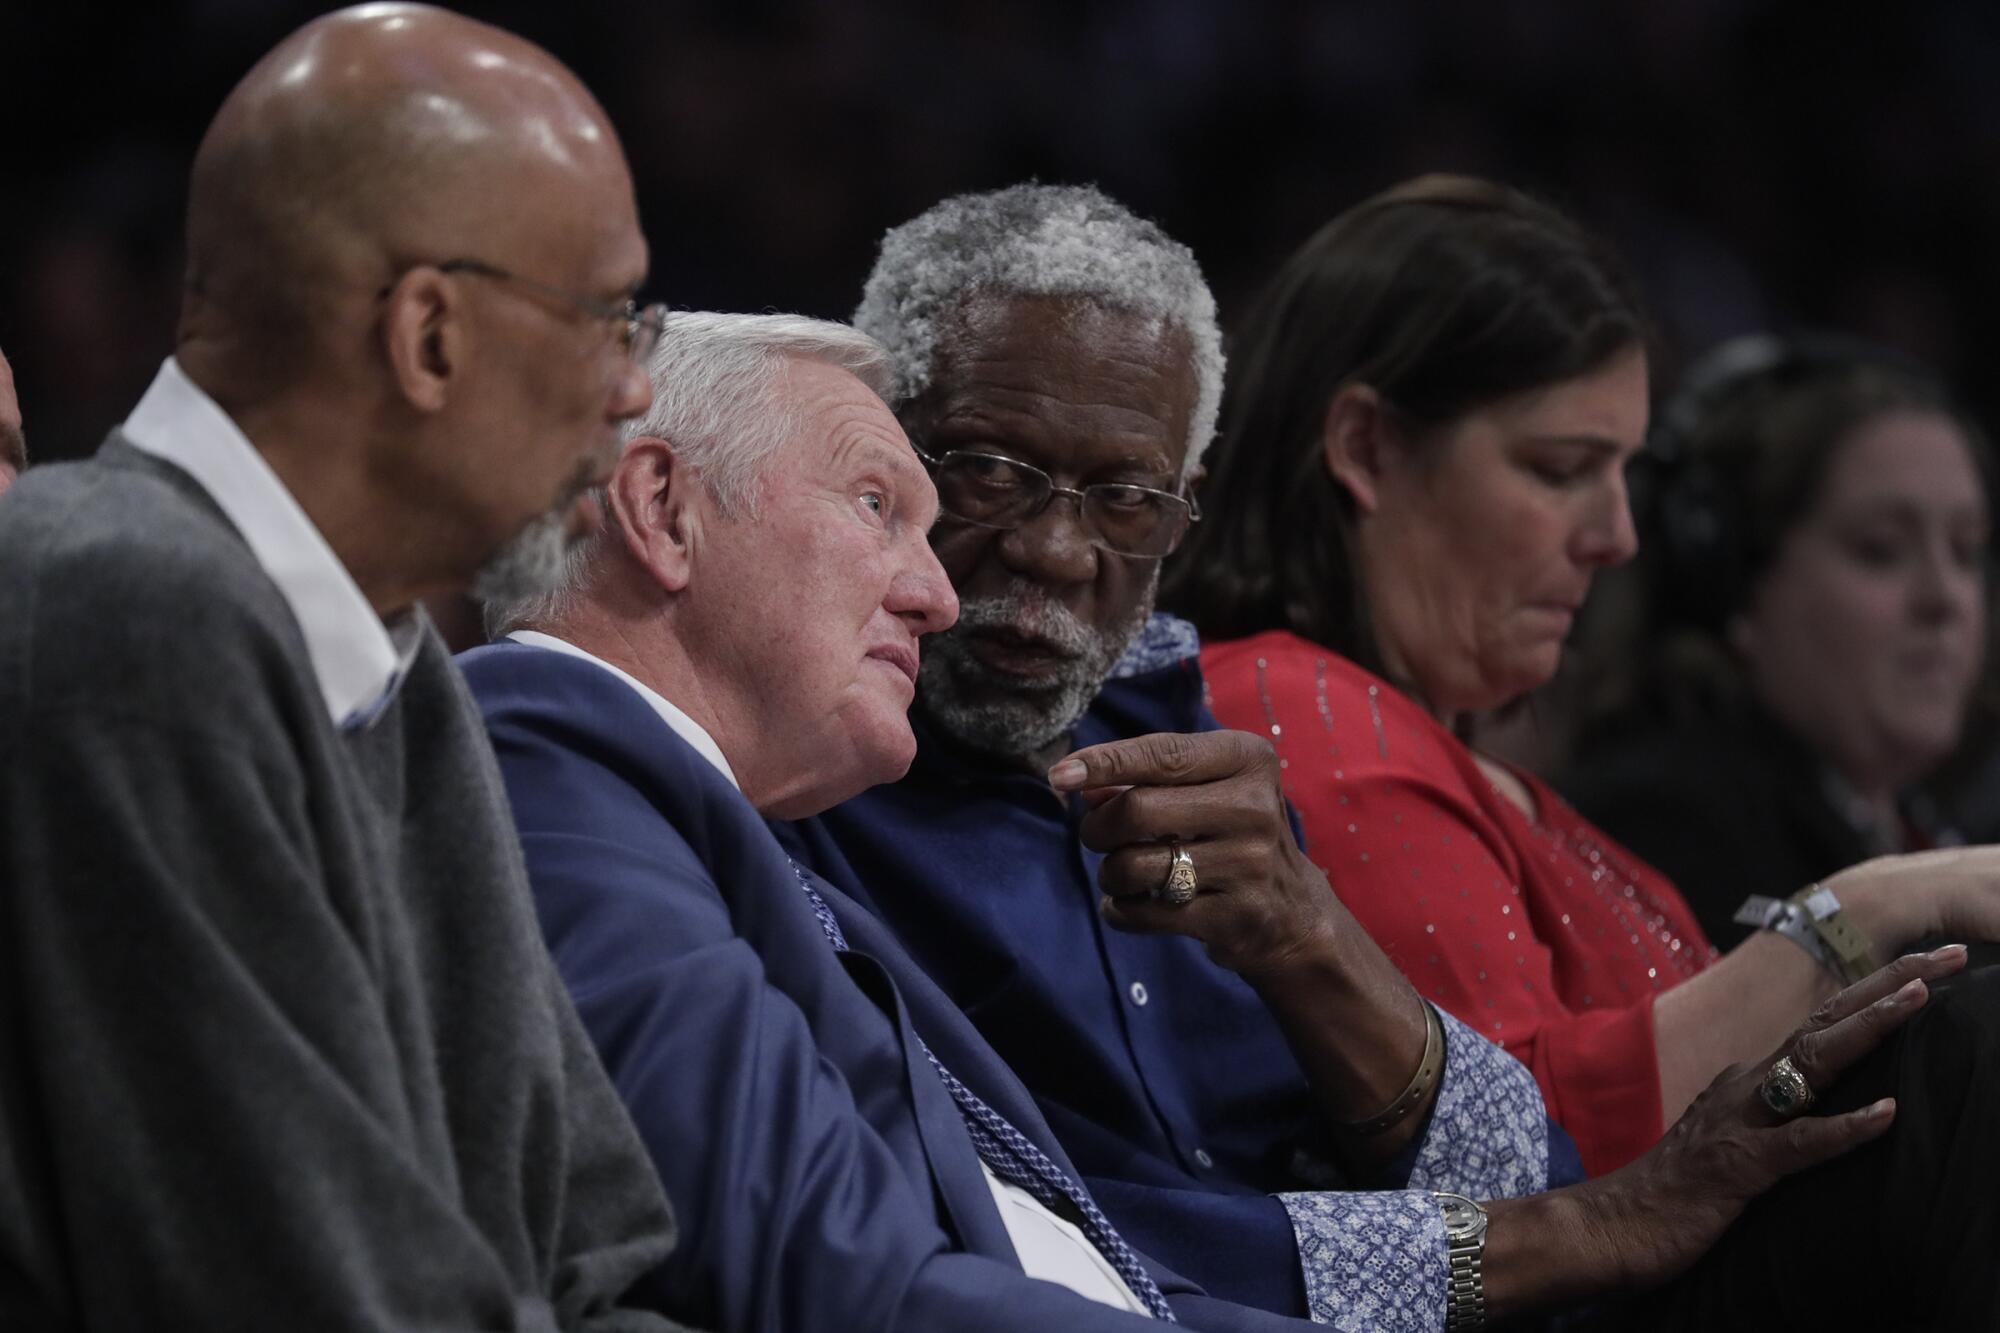 Jerry West, center, chats with Bill Russell, right, and Kareem Abdul-Jabbar courtside at the 2018 NBA All-Star game.